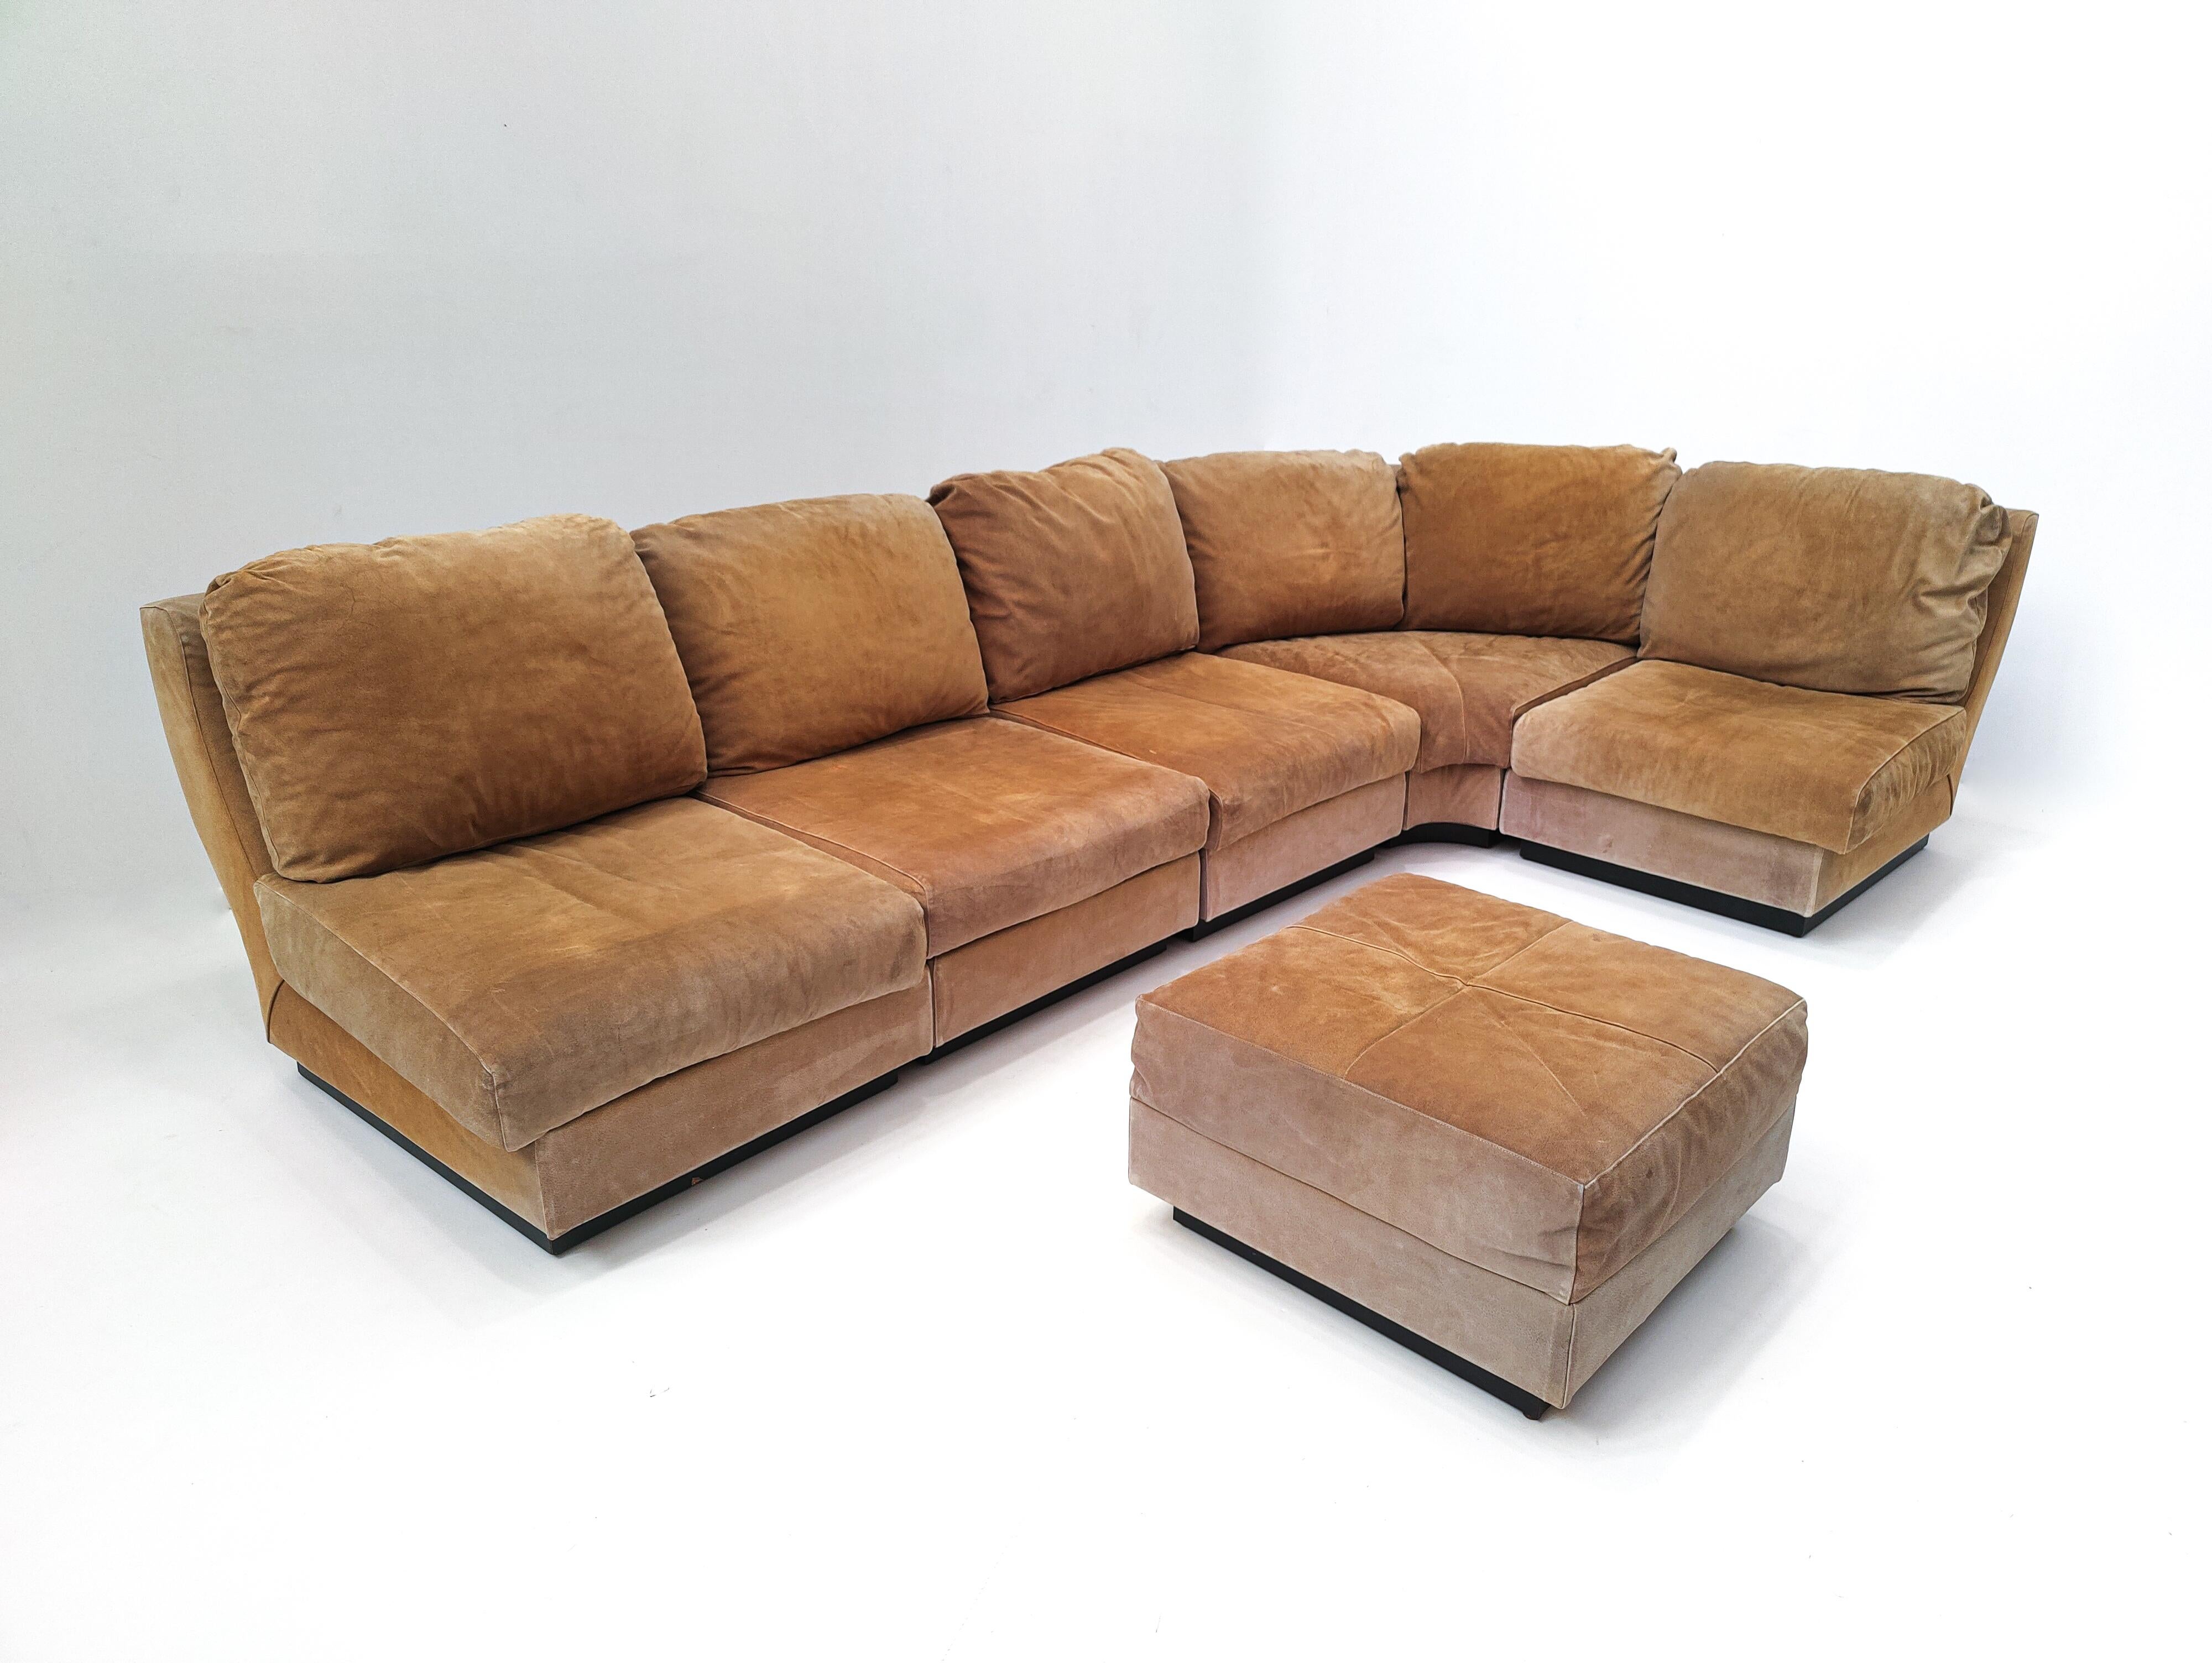 Mid-Century Modern Modular sofa set by Willy Rizzo, Suede, Italy, 1970s.